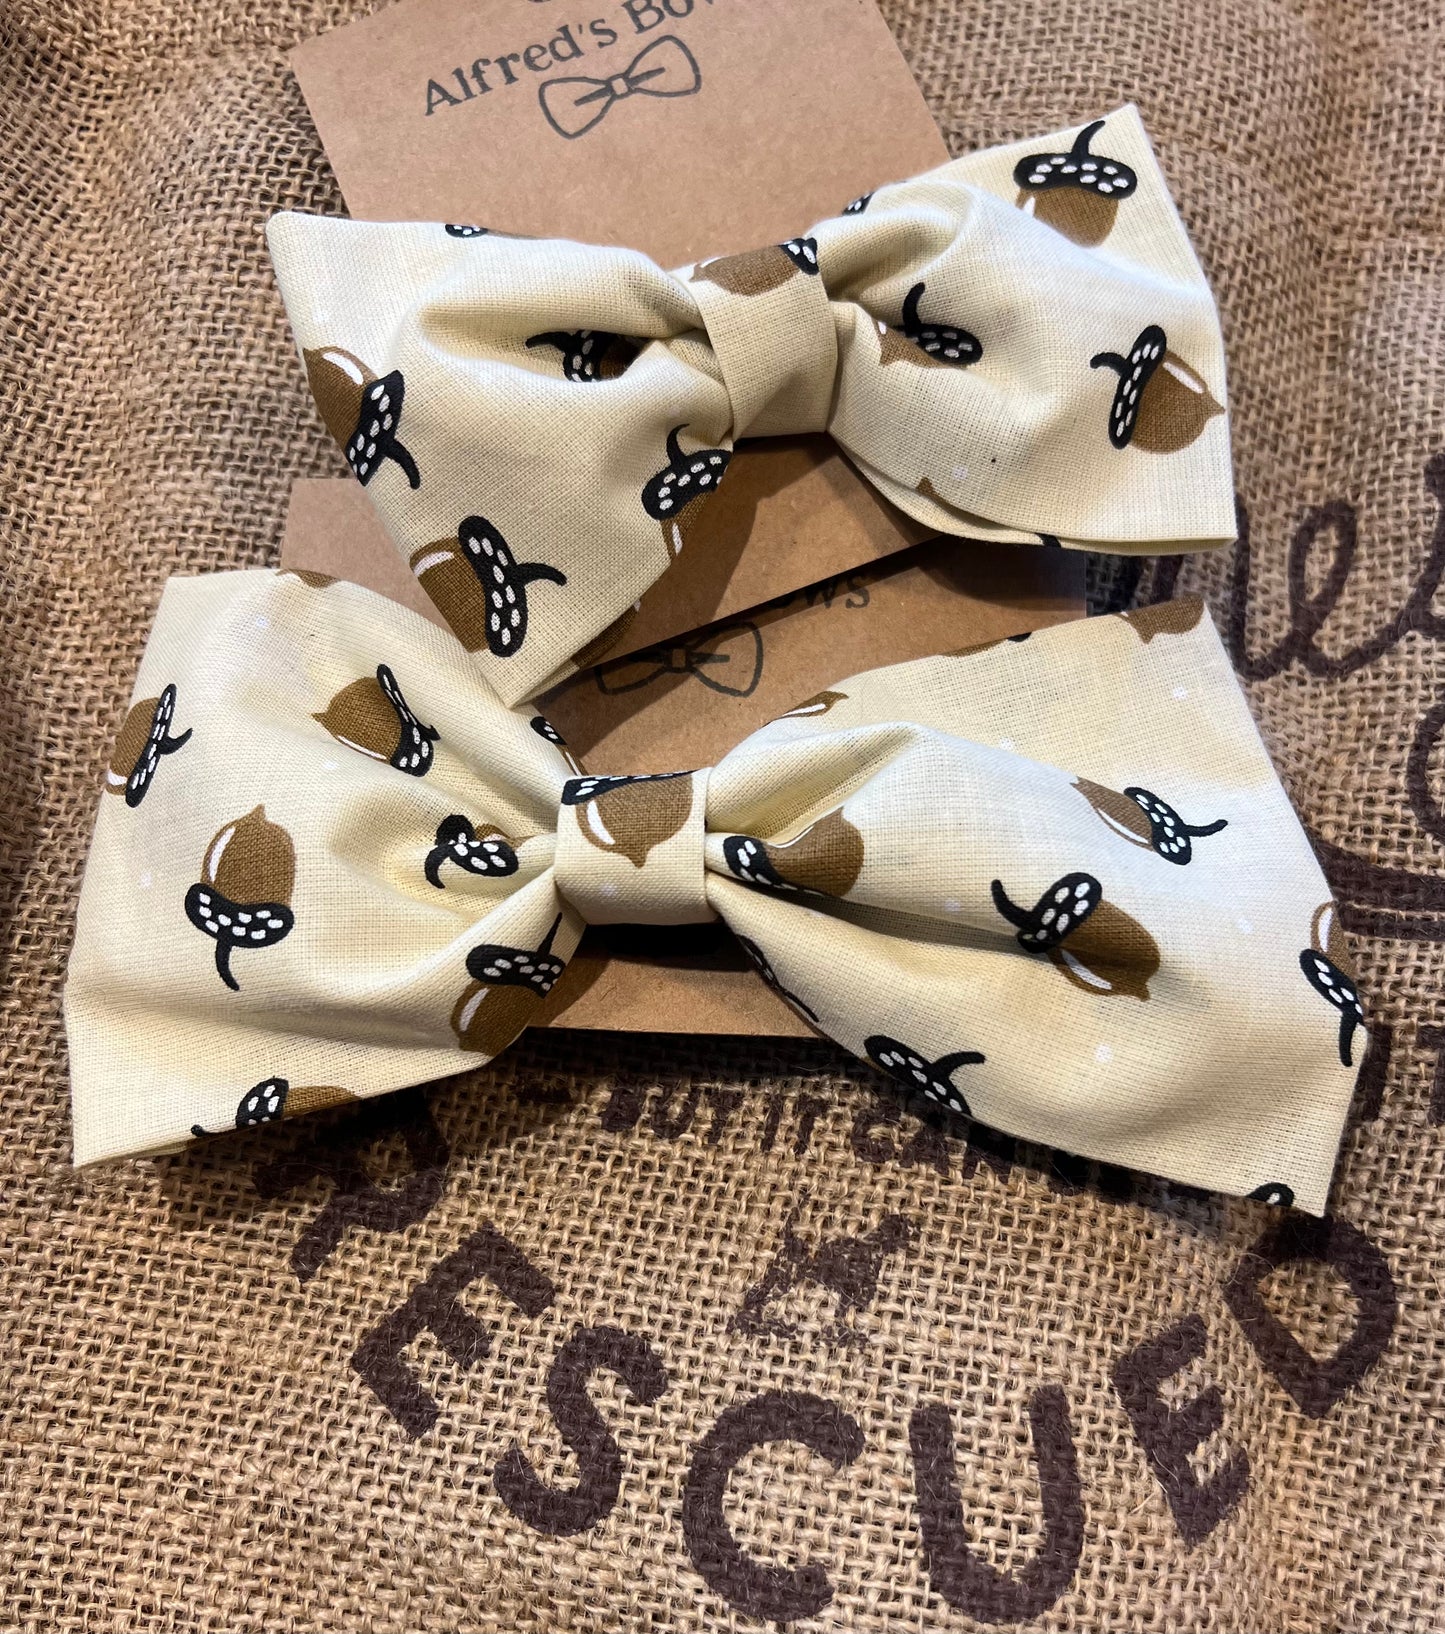 Alfred's Bows "Acorns" Large Bow